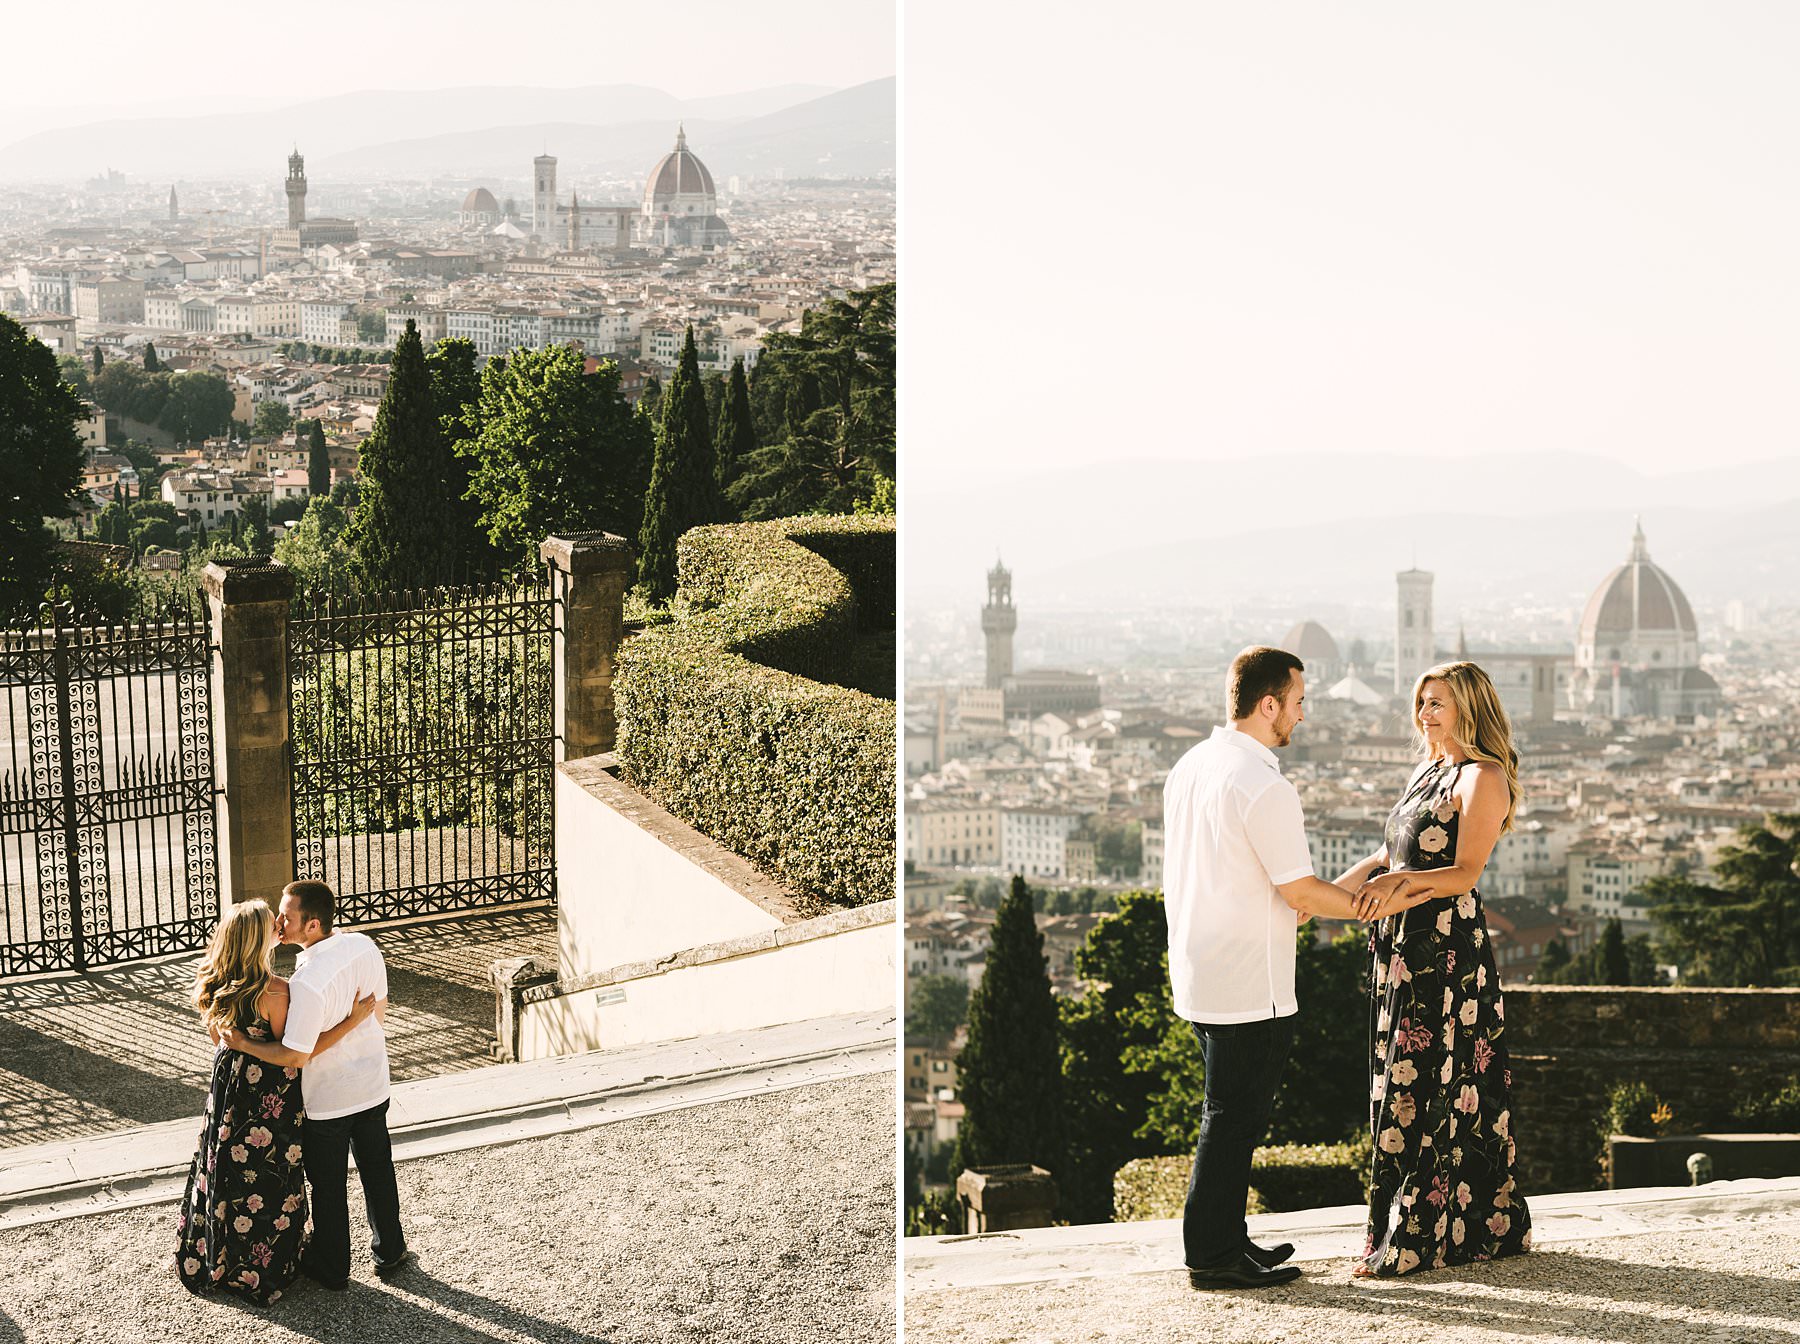 Delicate outdoor engagement photos in Tuscany: a holiday to remember. When you happen to visit a charming city like Florence and you’ve recently got engaged, there is only one thing you can do: get outdoor engagement photos taken in the best spots of the town and countryside. They will allow you to honor that precious moment and keep a never ending memory of a unique holiday. This is what brought Andrea and Aaron to contact me on a summer day…